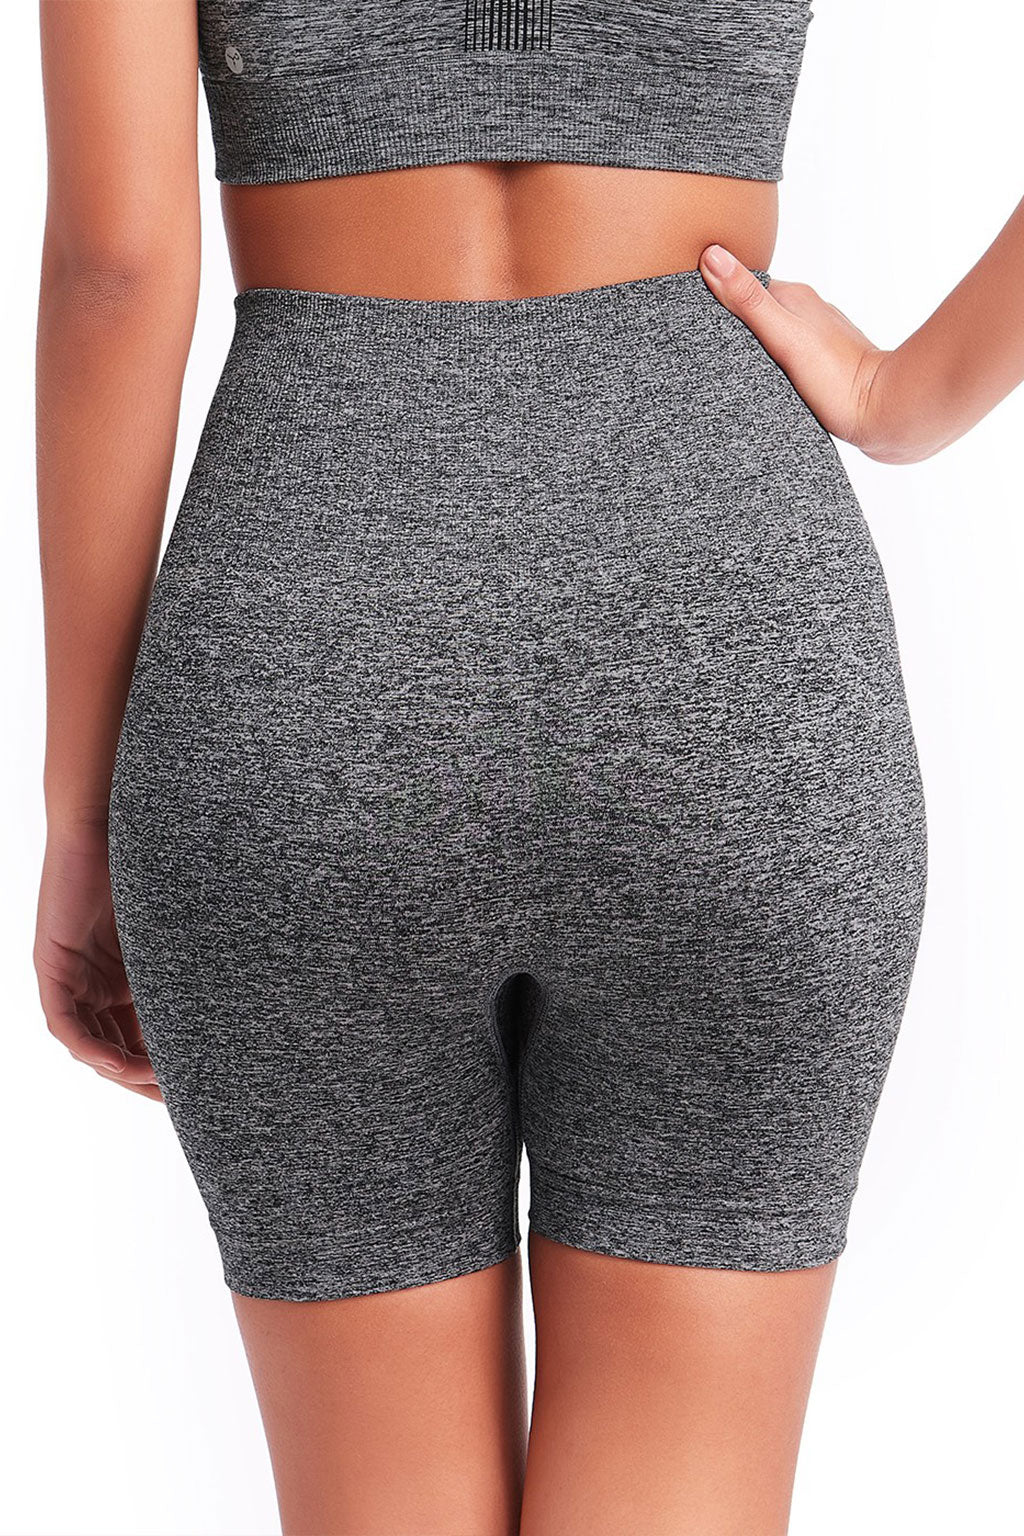 FITNESS Sport Shorts with double and versatile waistband